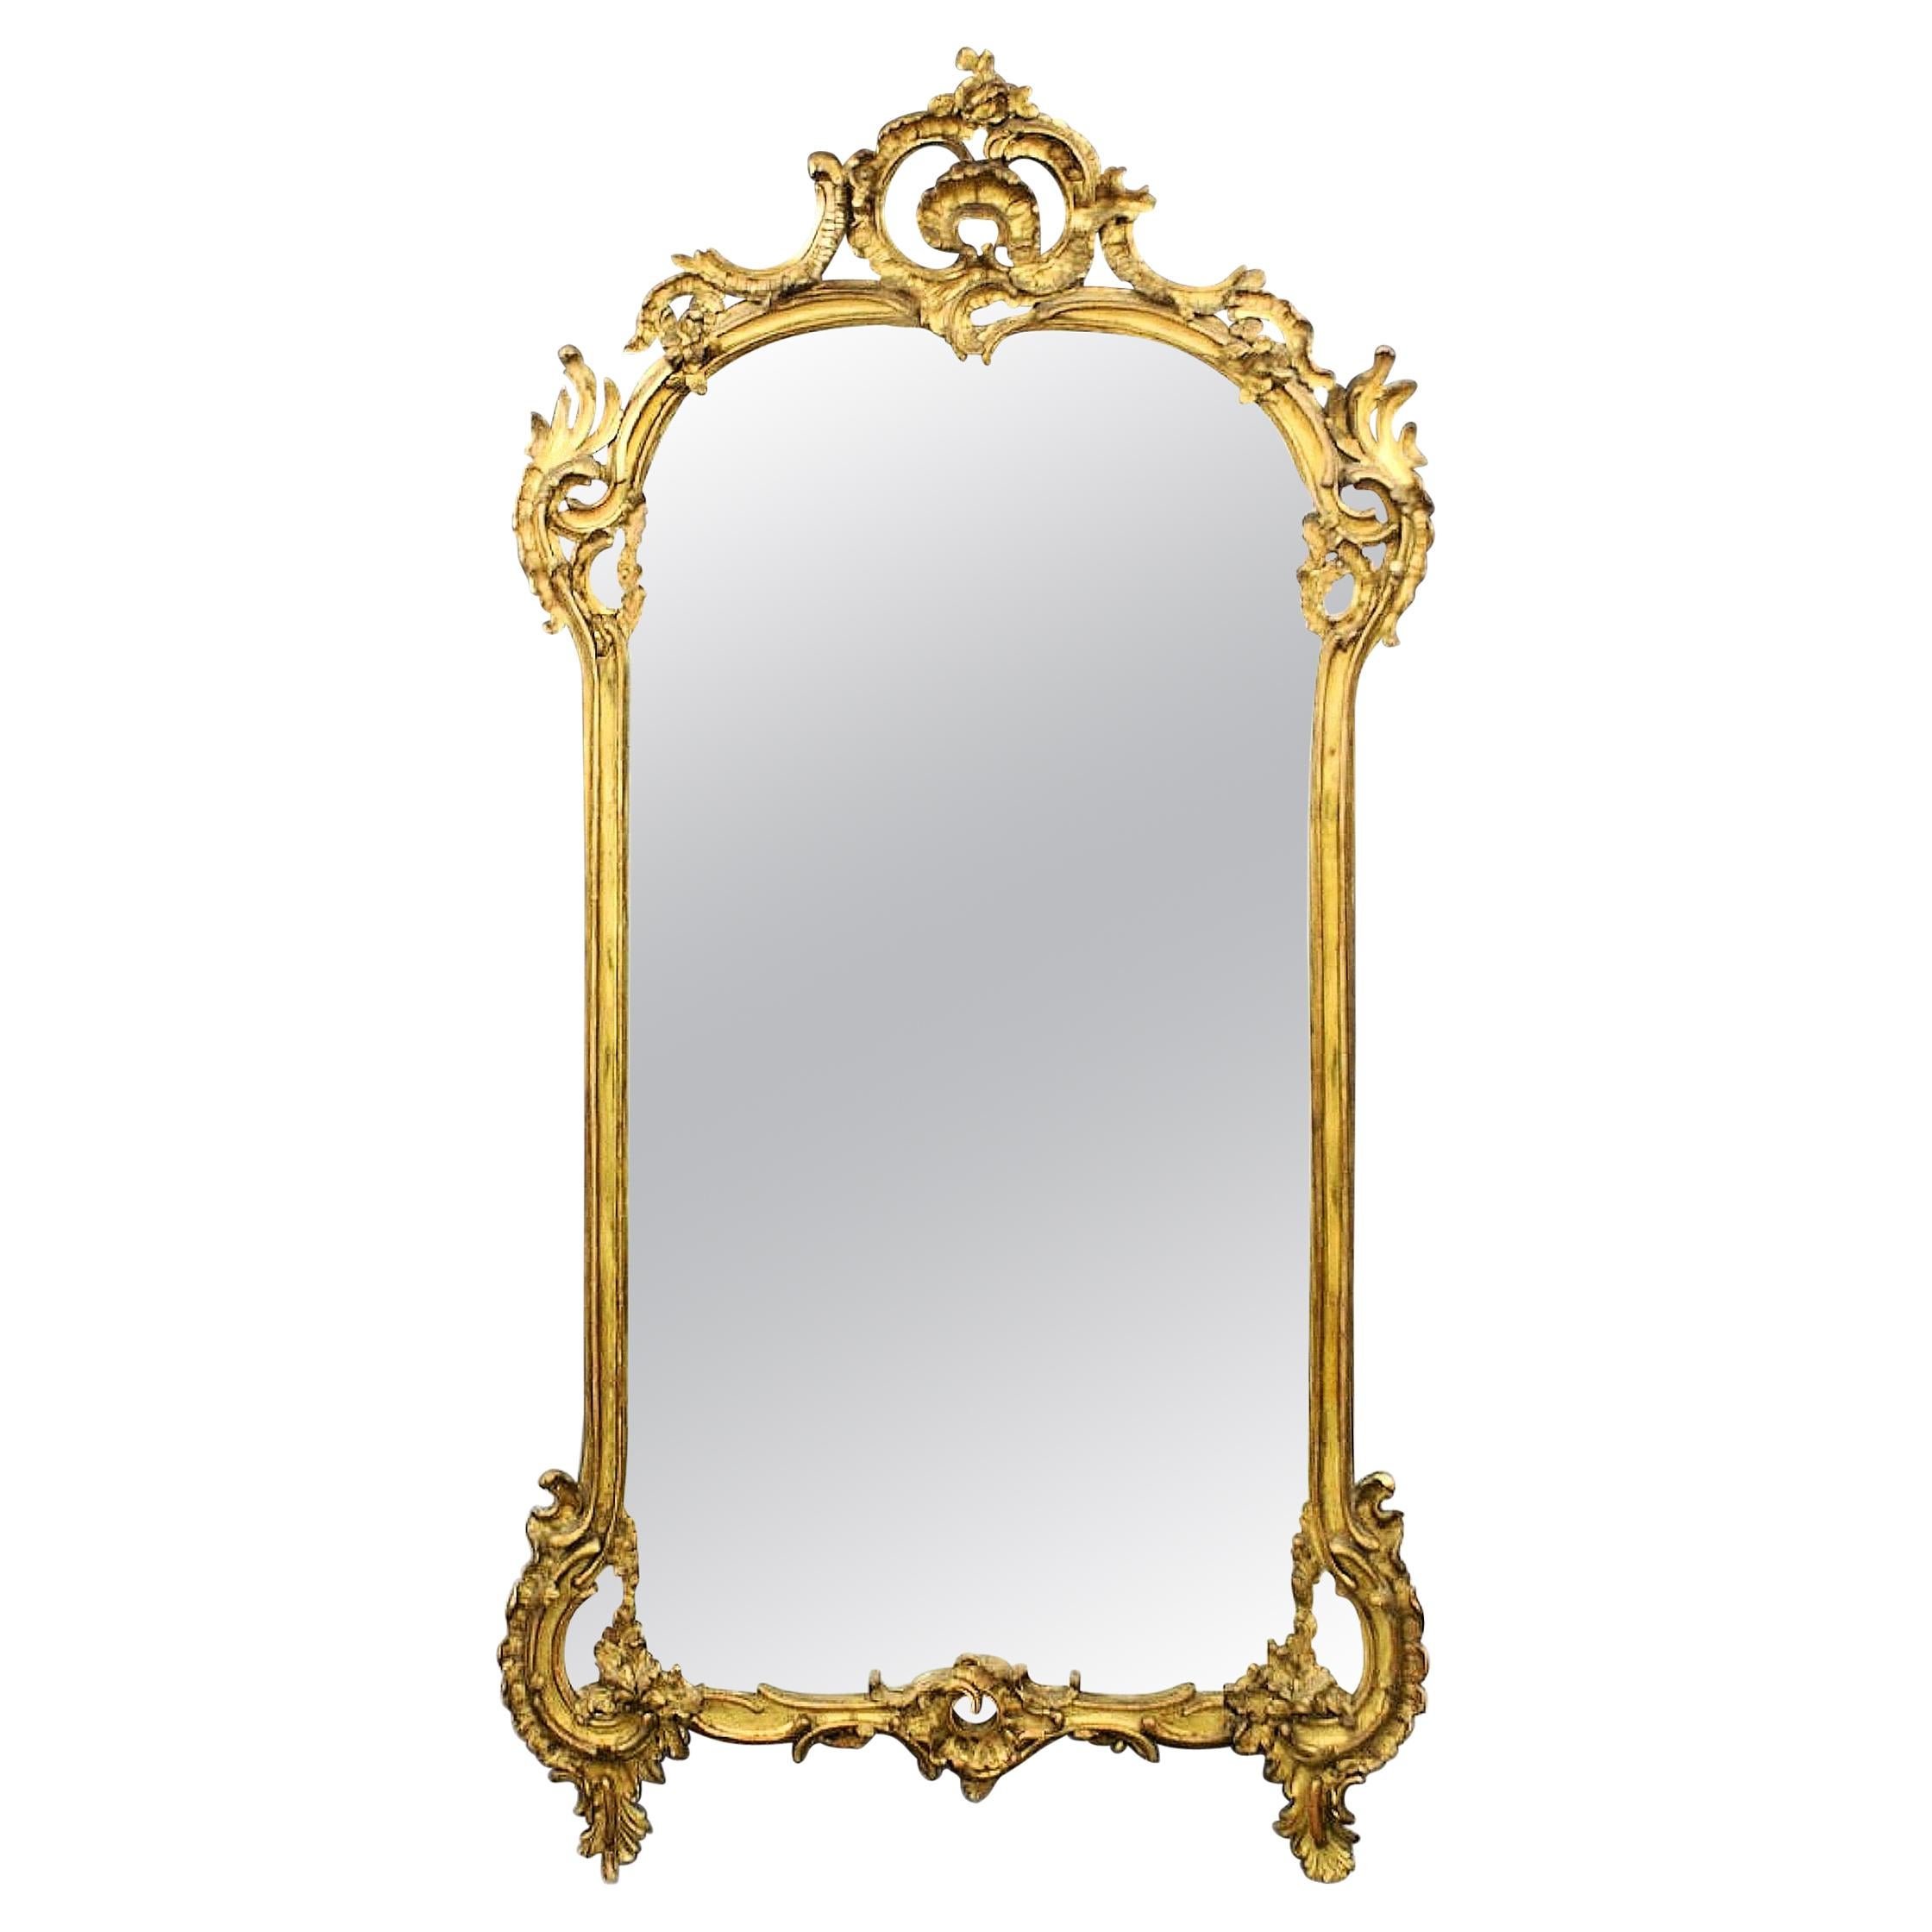 Oversized 19th c. French Ornate Gilt Mirror For Sale